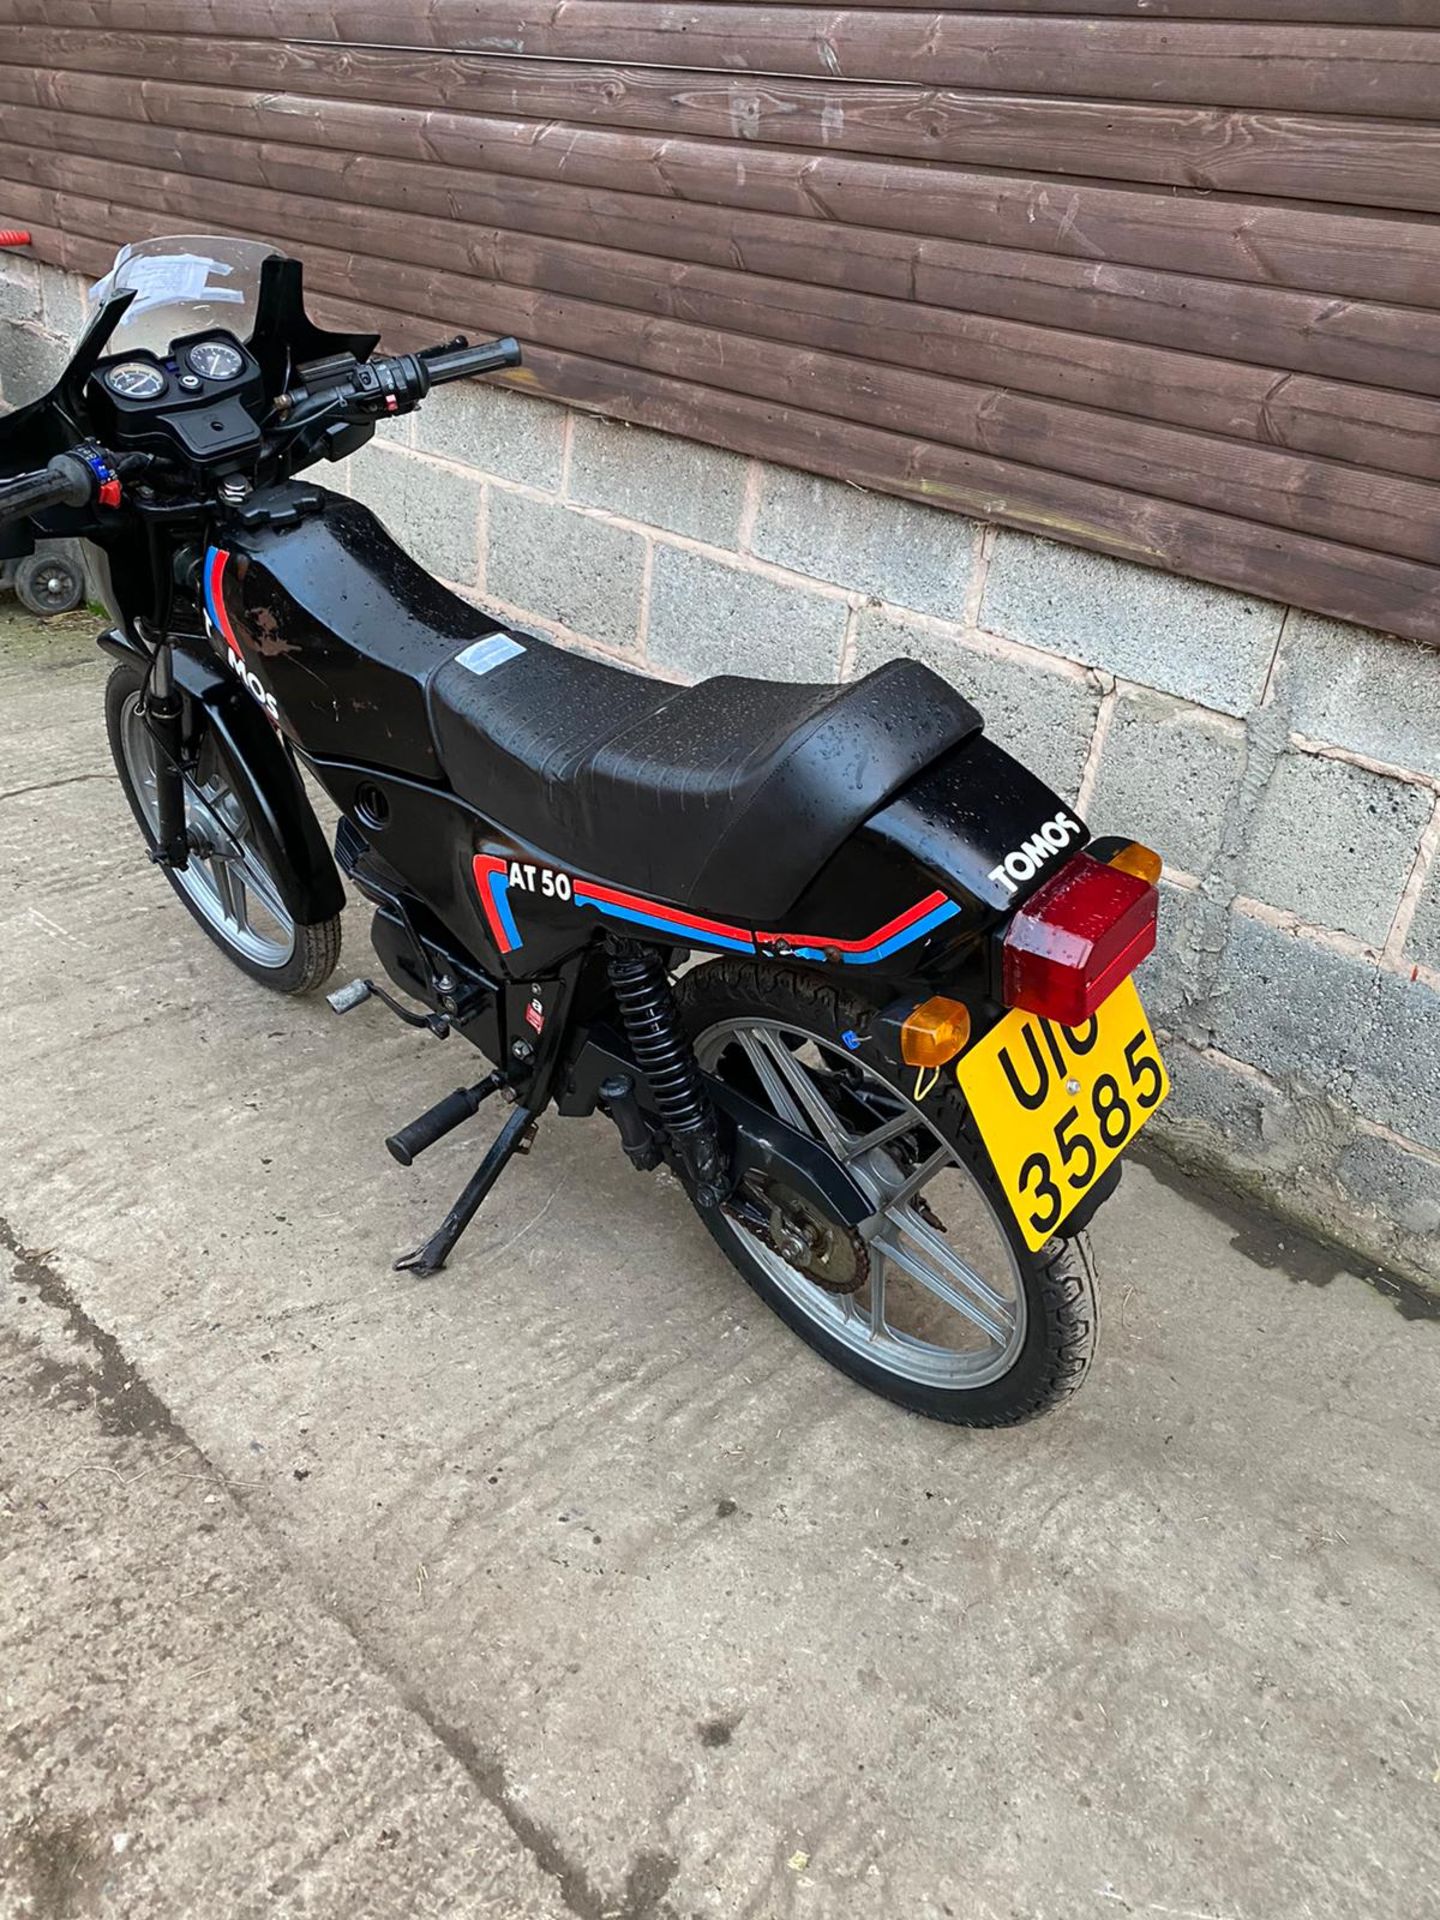 TOMOS AT50 MOPED, YEAR 1989, PETROL, MILEAGE: 34,180, DOCUMENTS PRESENT *NO VAT* - Image 2 of 5